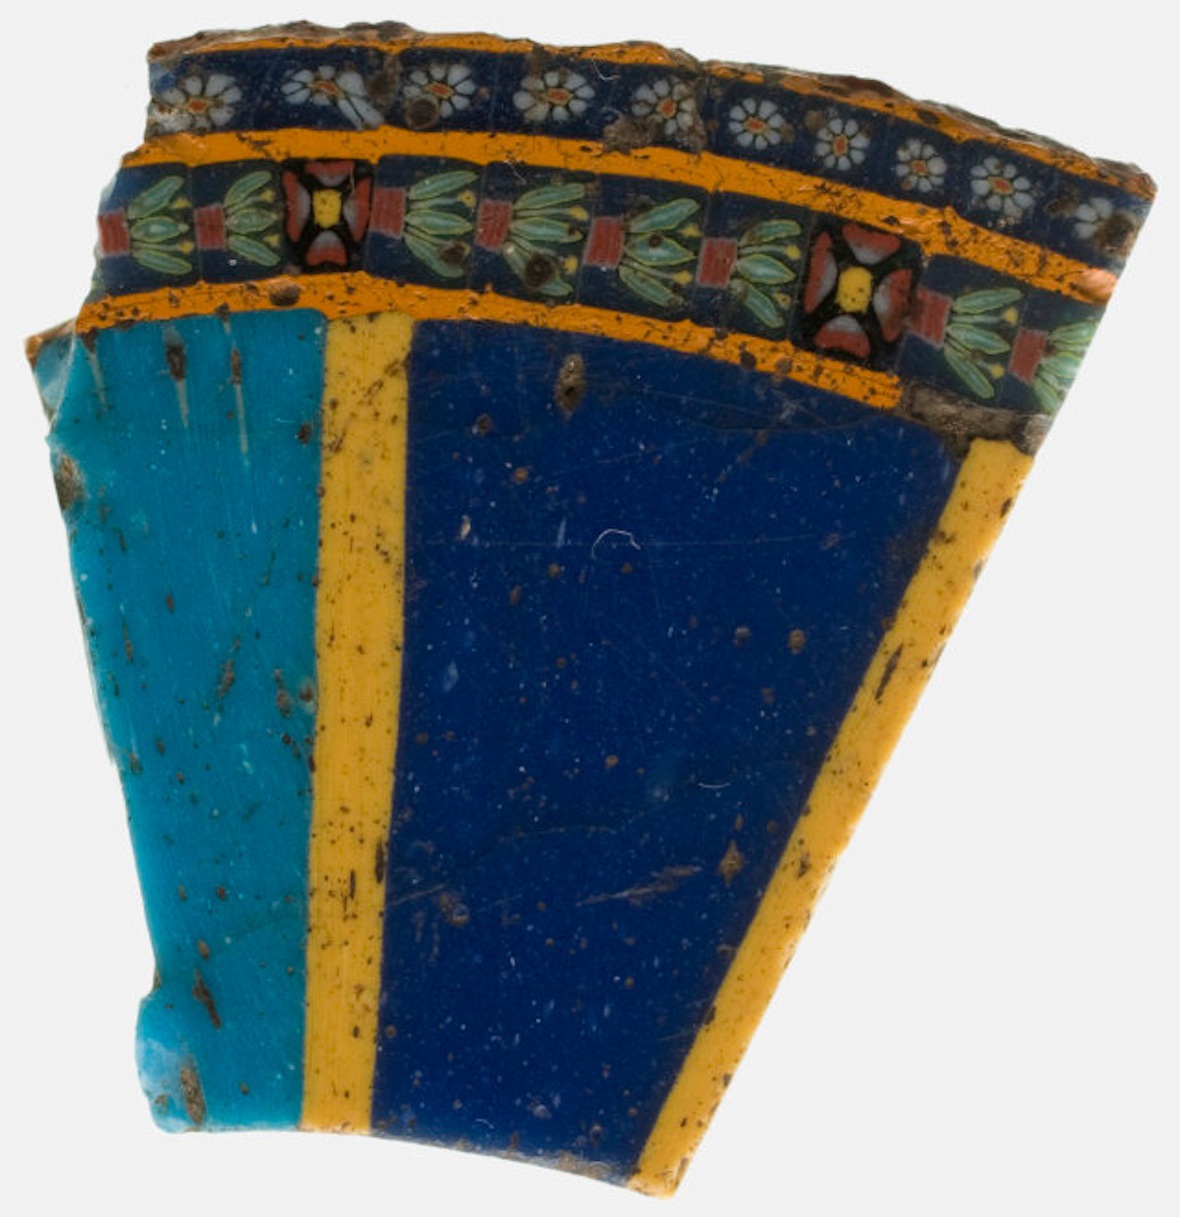 Fragment of an Inlay